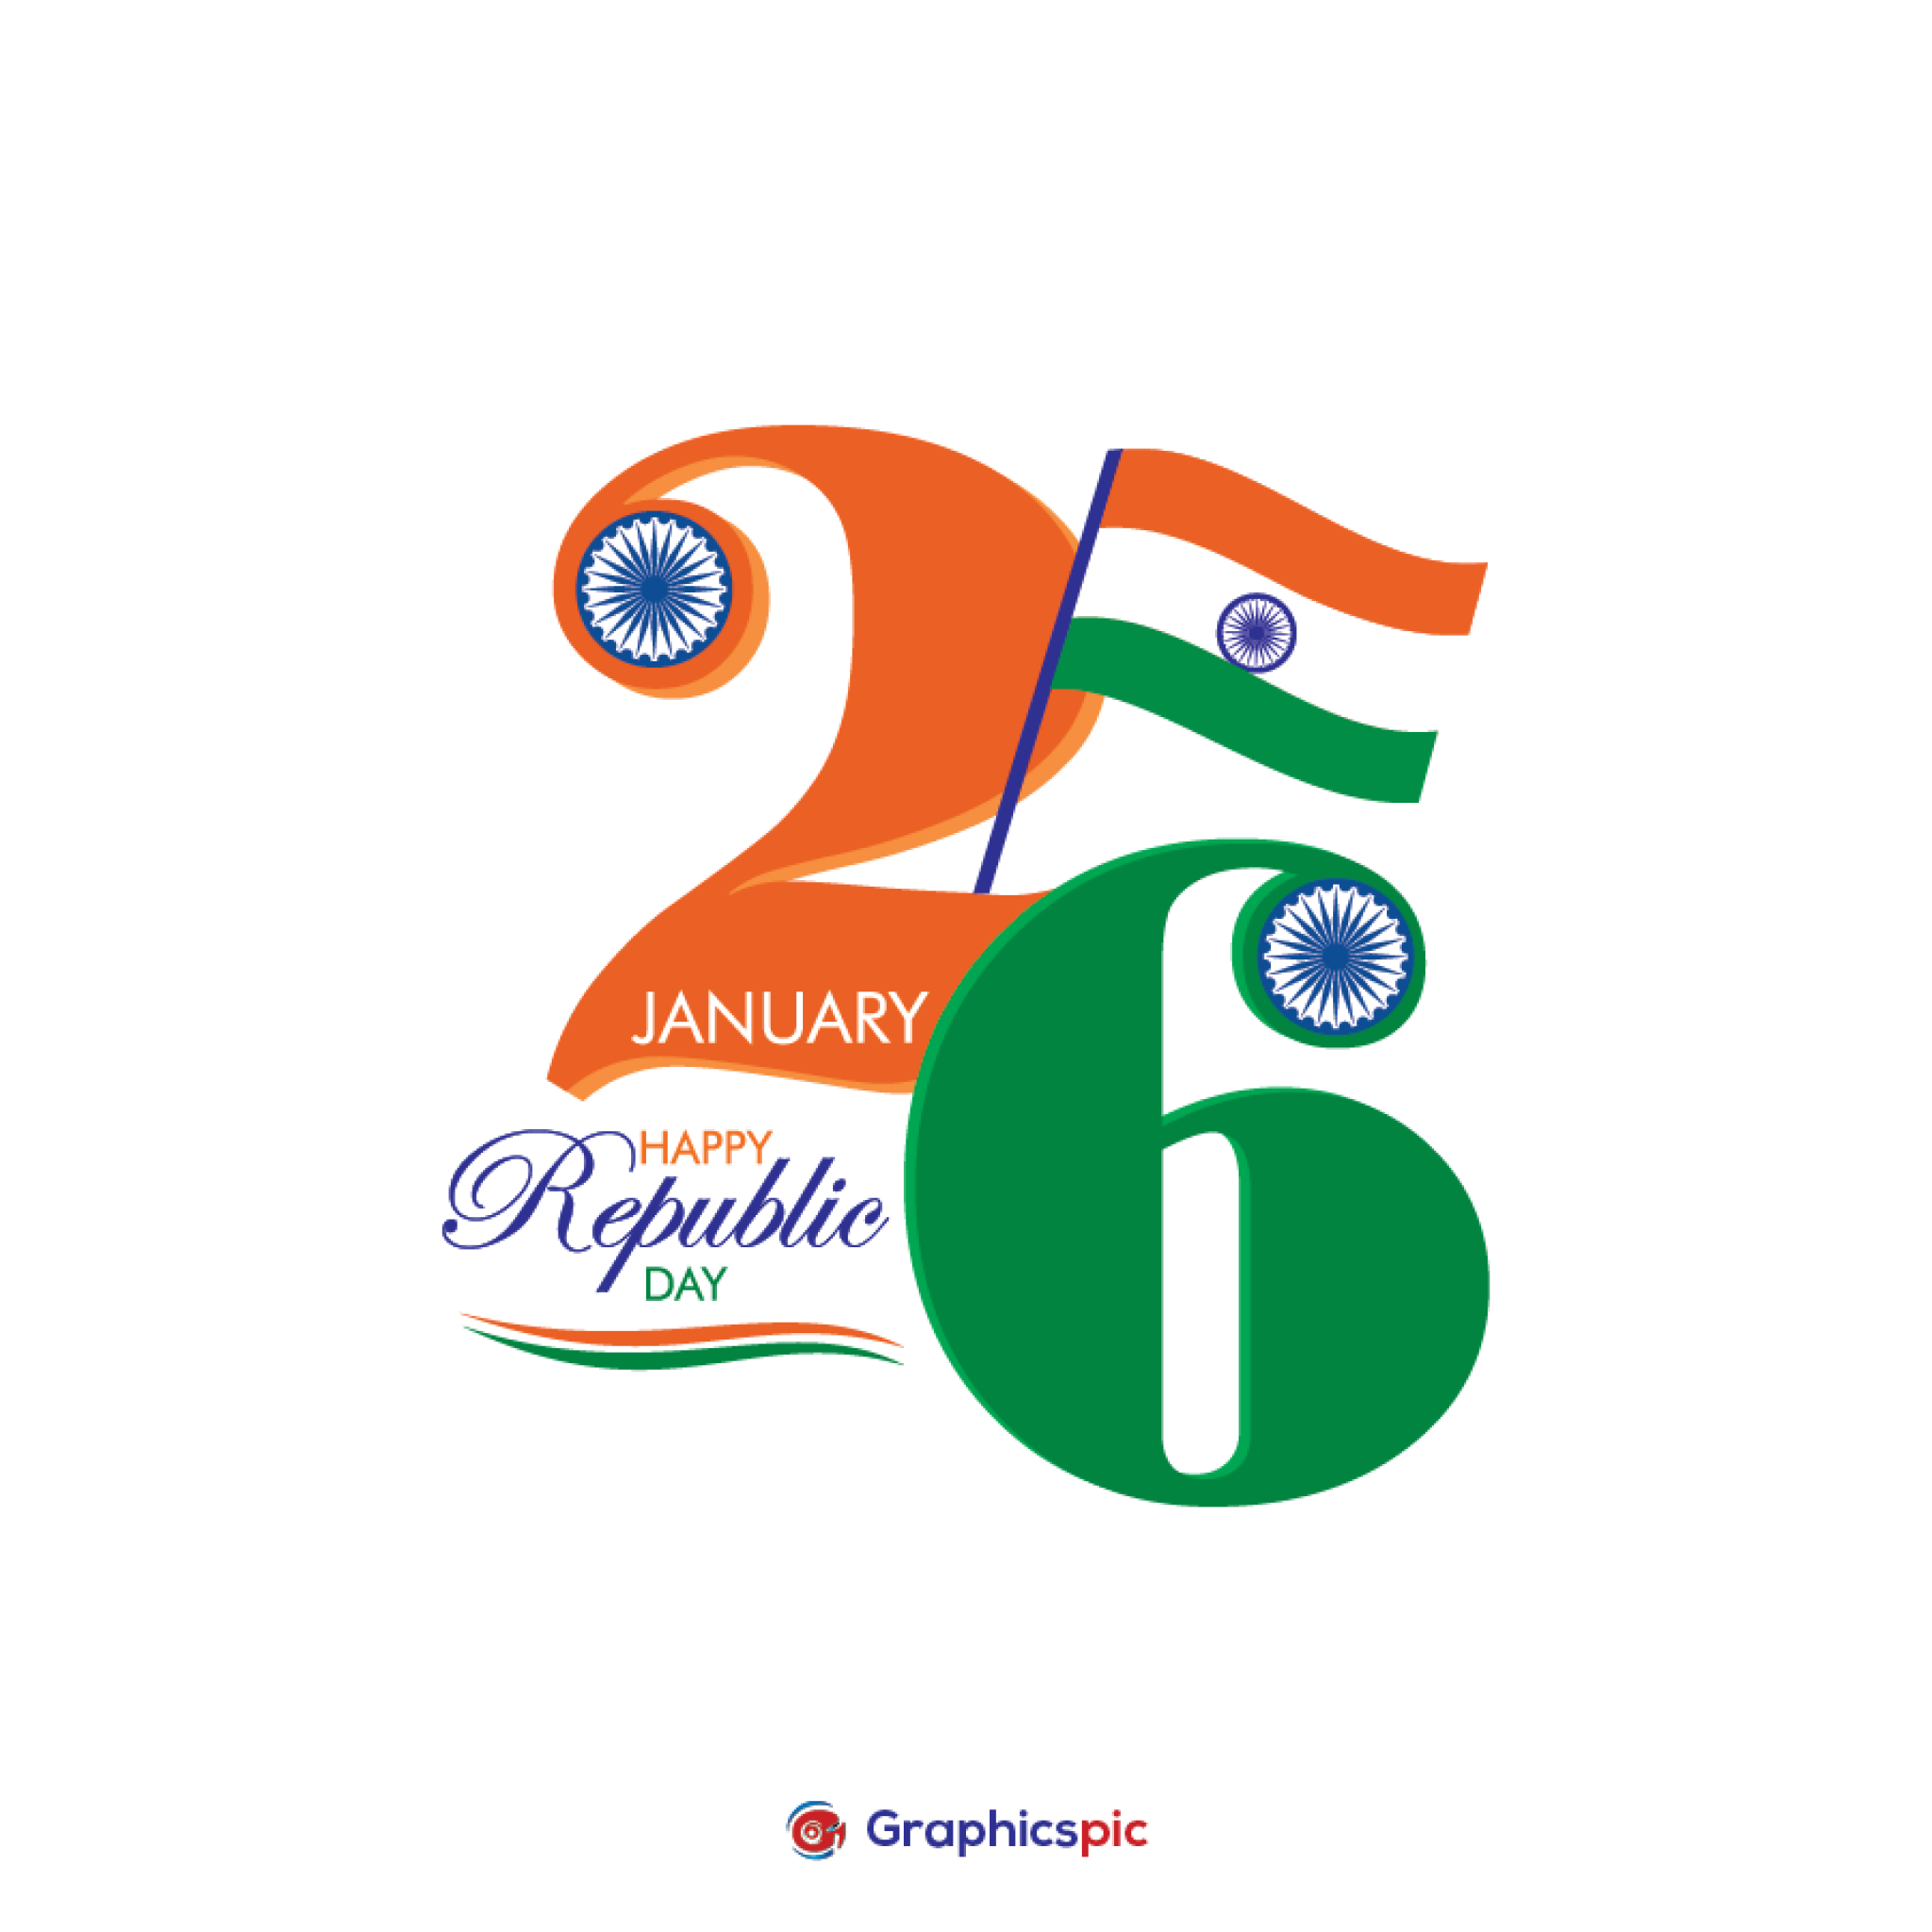 Illustration Vector Of Happy Republic Day Of India Concept With Indian